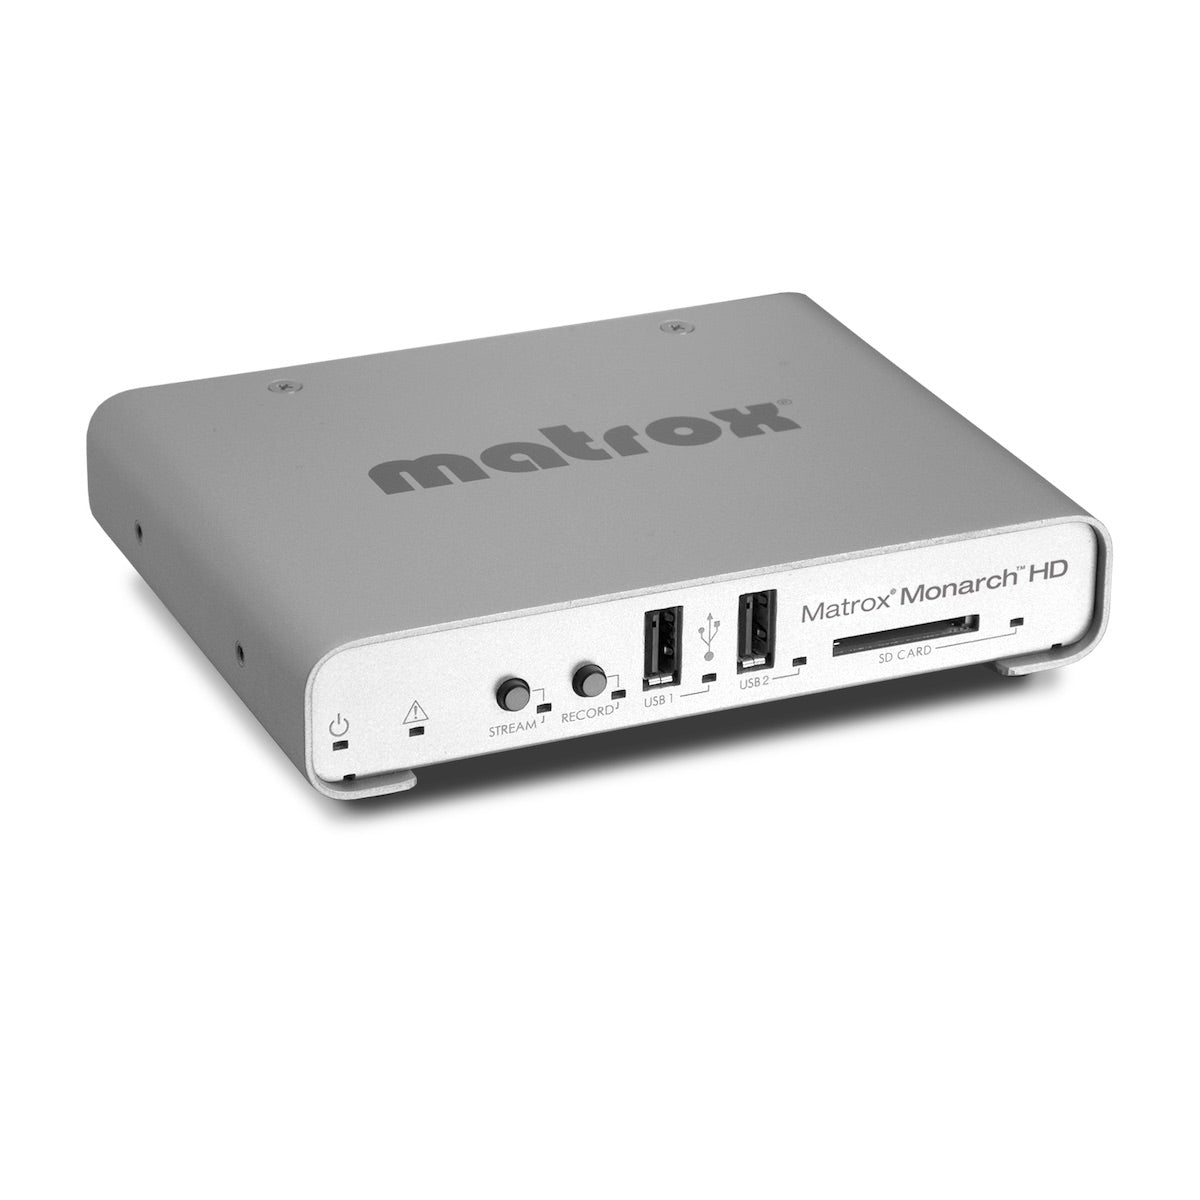 Matrox Monarch HD - H.264 Video Streaming Encoder and Recording Appliance